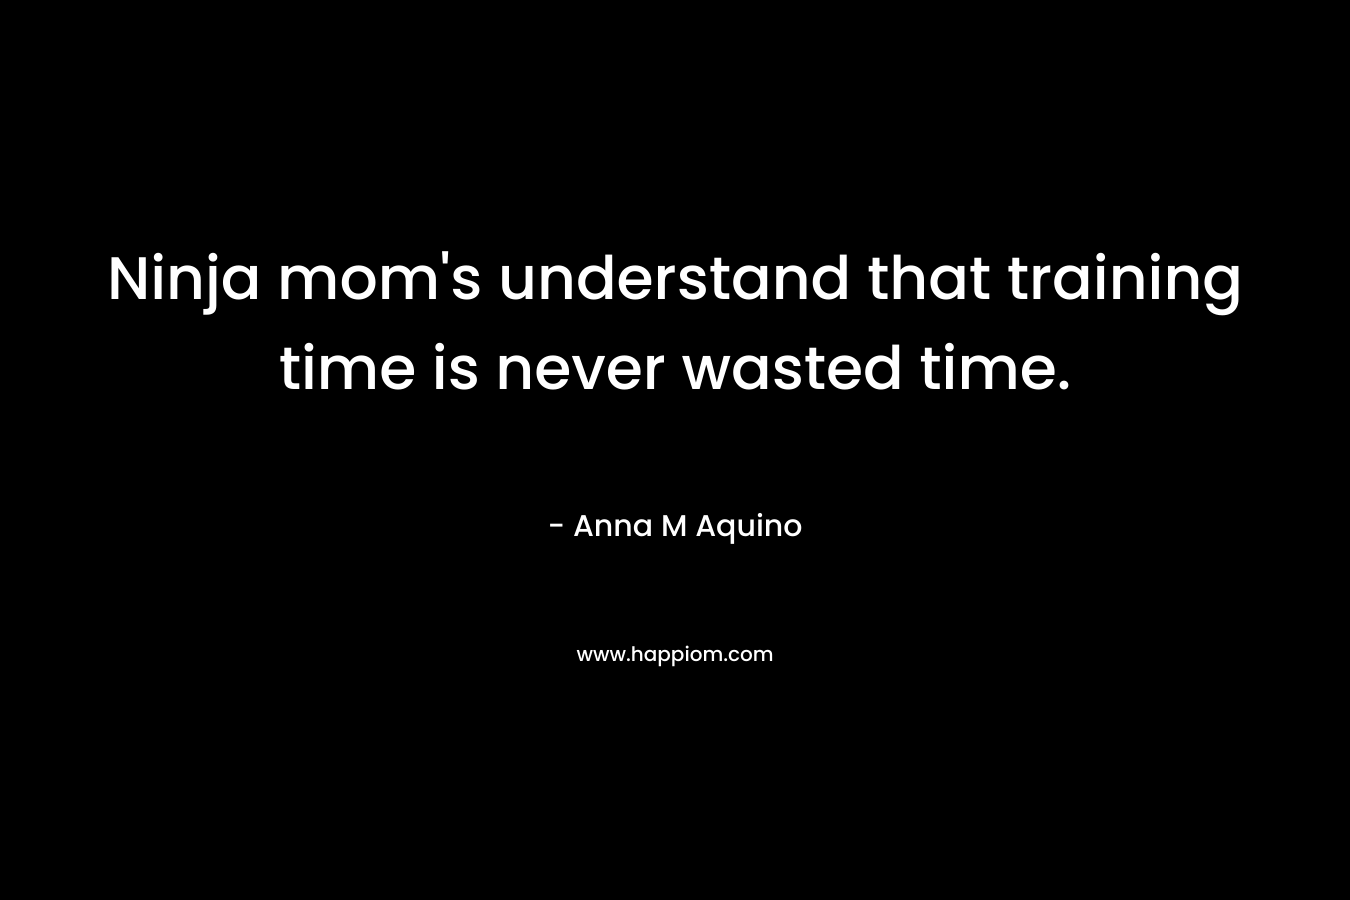 Ninja mom’s understand that training time is never wasted time. – Anna M Aquino